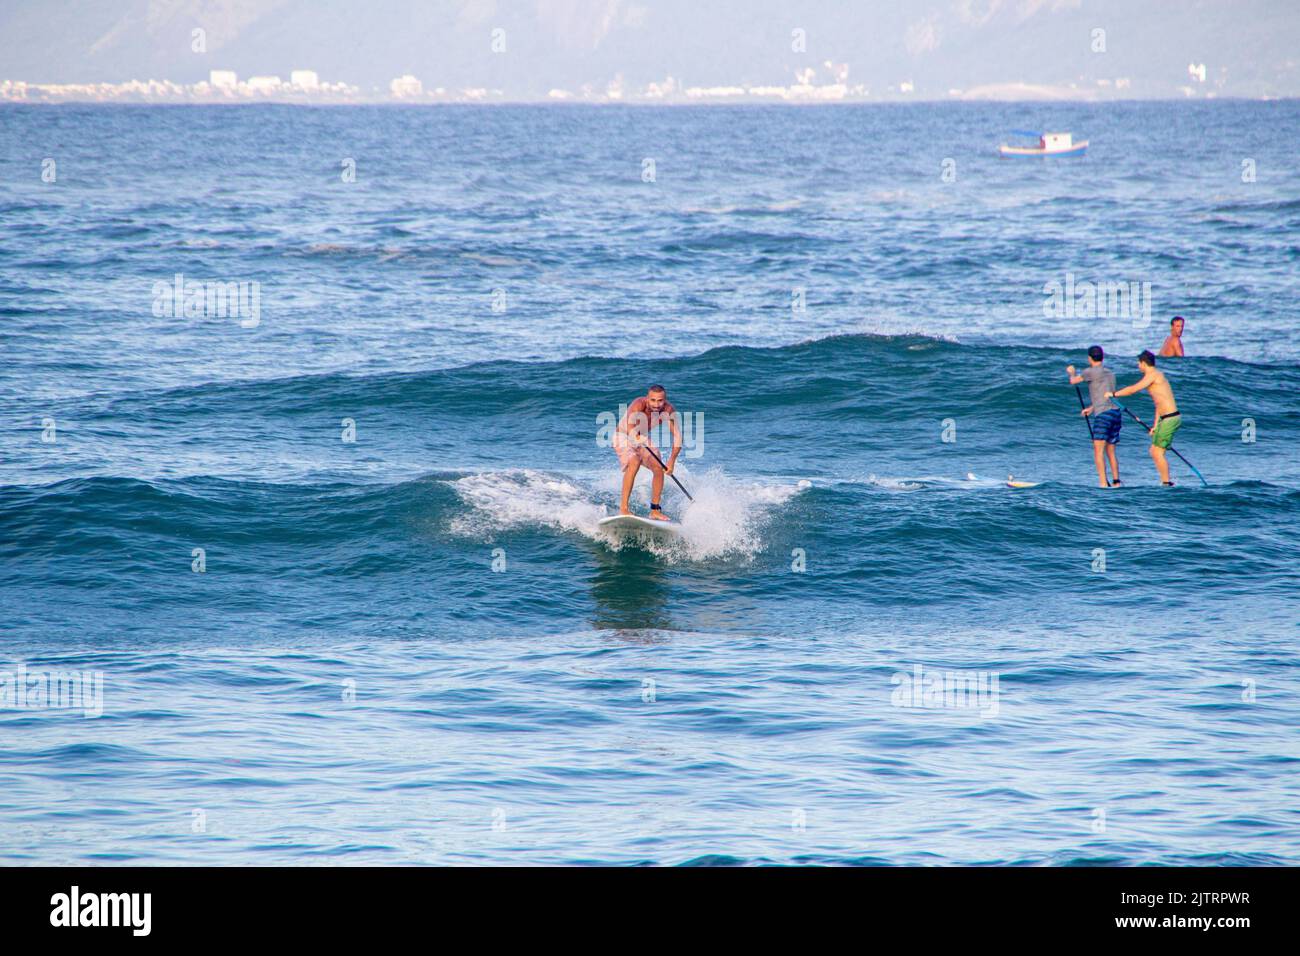 Man practicing stand up paddle at Copacabana beach in Rio de Janeiro, Brazil - March 7, 2020: Man practicing stand up paddle at post six on Copacabana Stock Photo